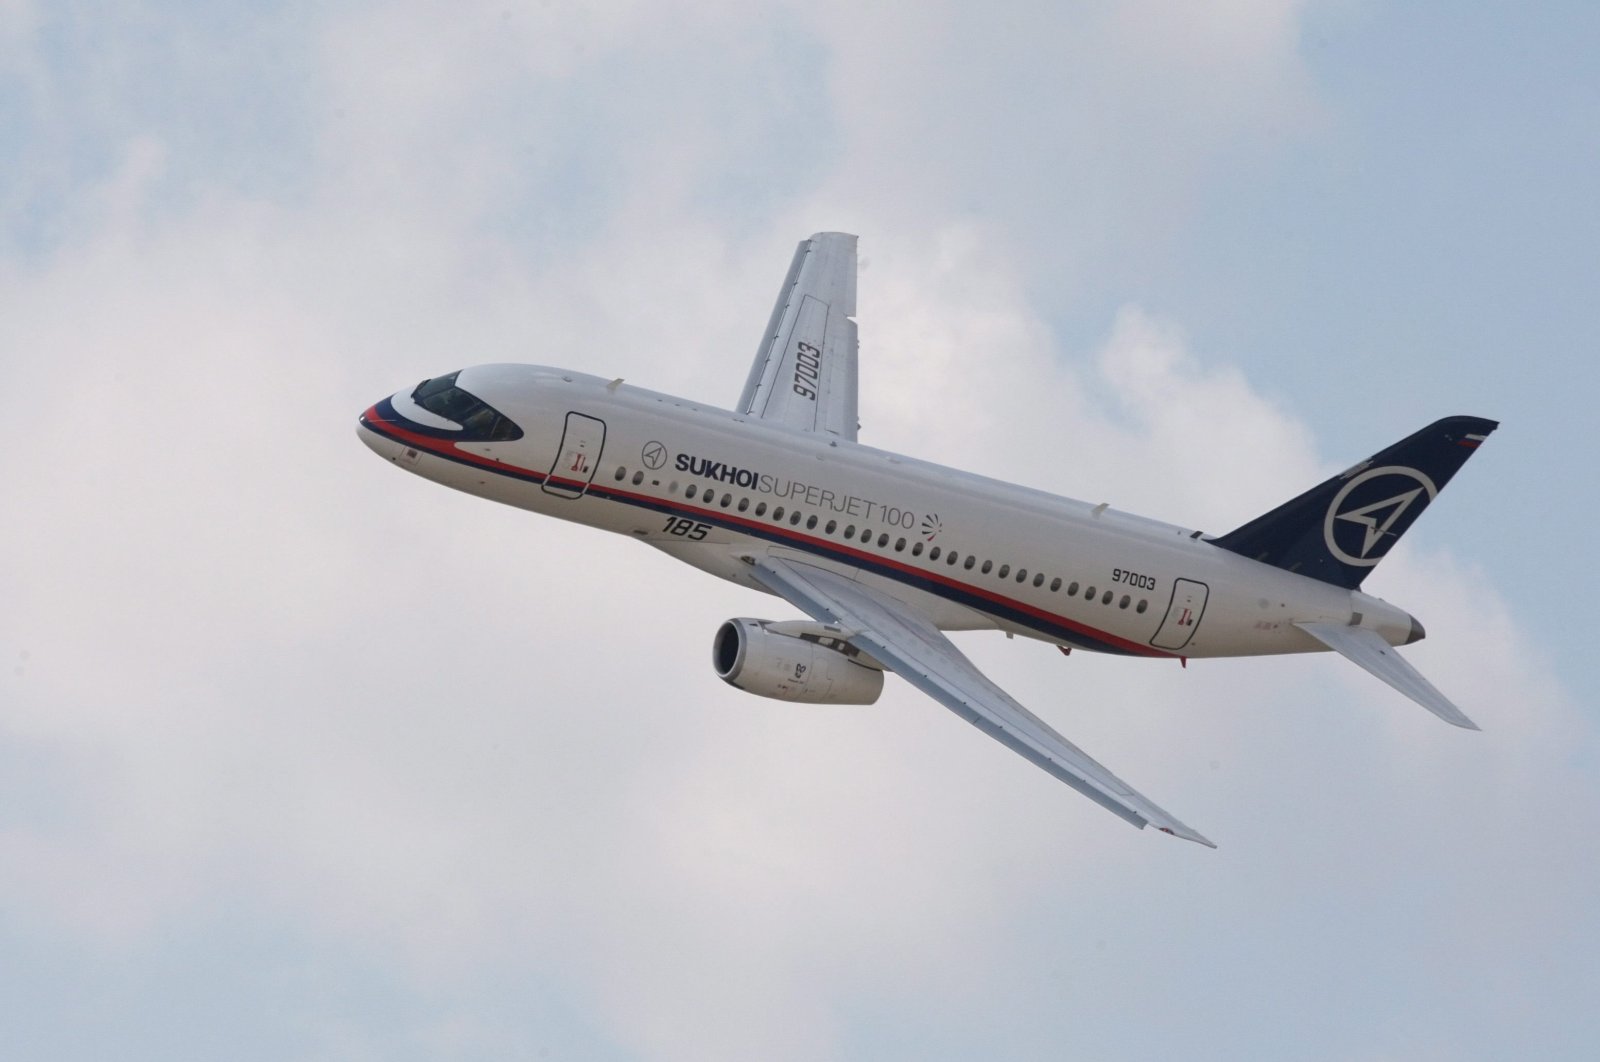 This file photo shows a Sukhoi Superjet 100 airplane during the Moscow International Air-Space, Russia, Aug. 18 2009. (EPA)